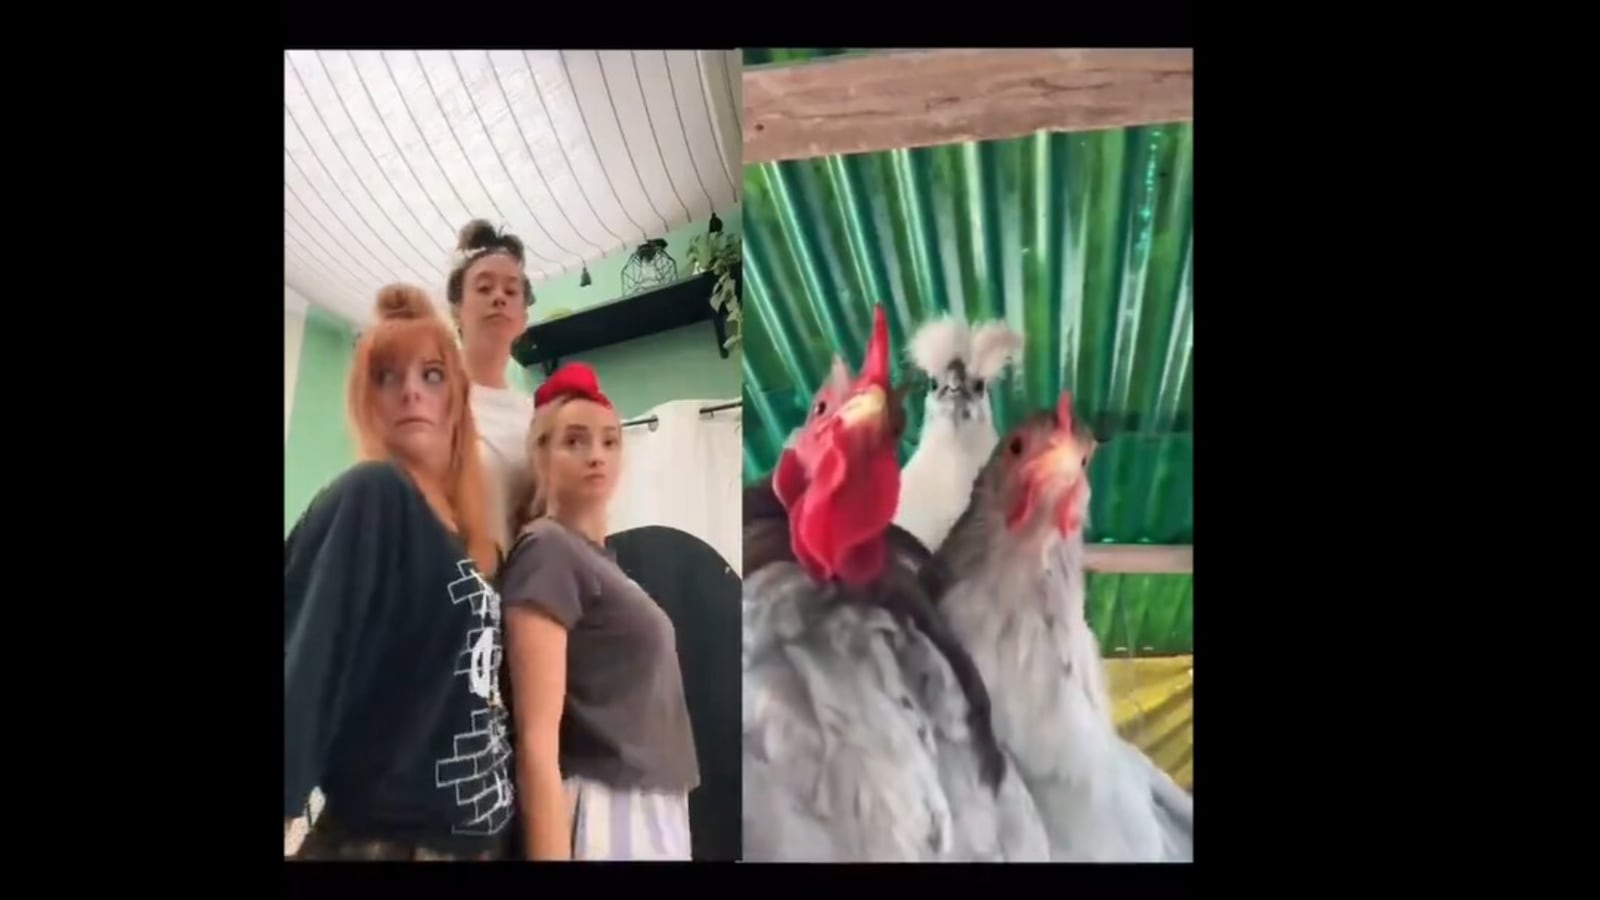 Christmas-themed hen dance viral video has netizens in stitches; Know its origin, creators, extra